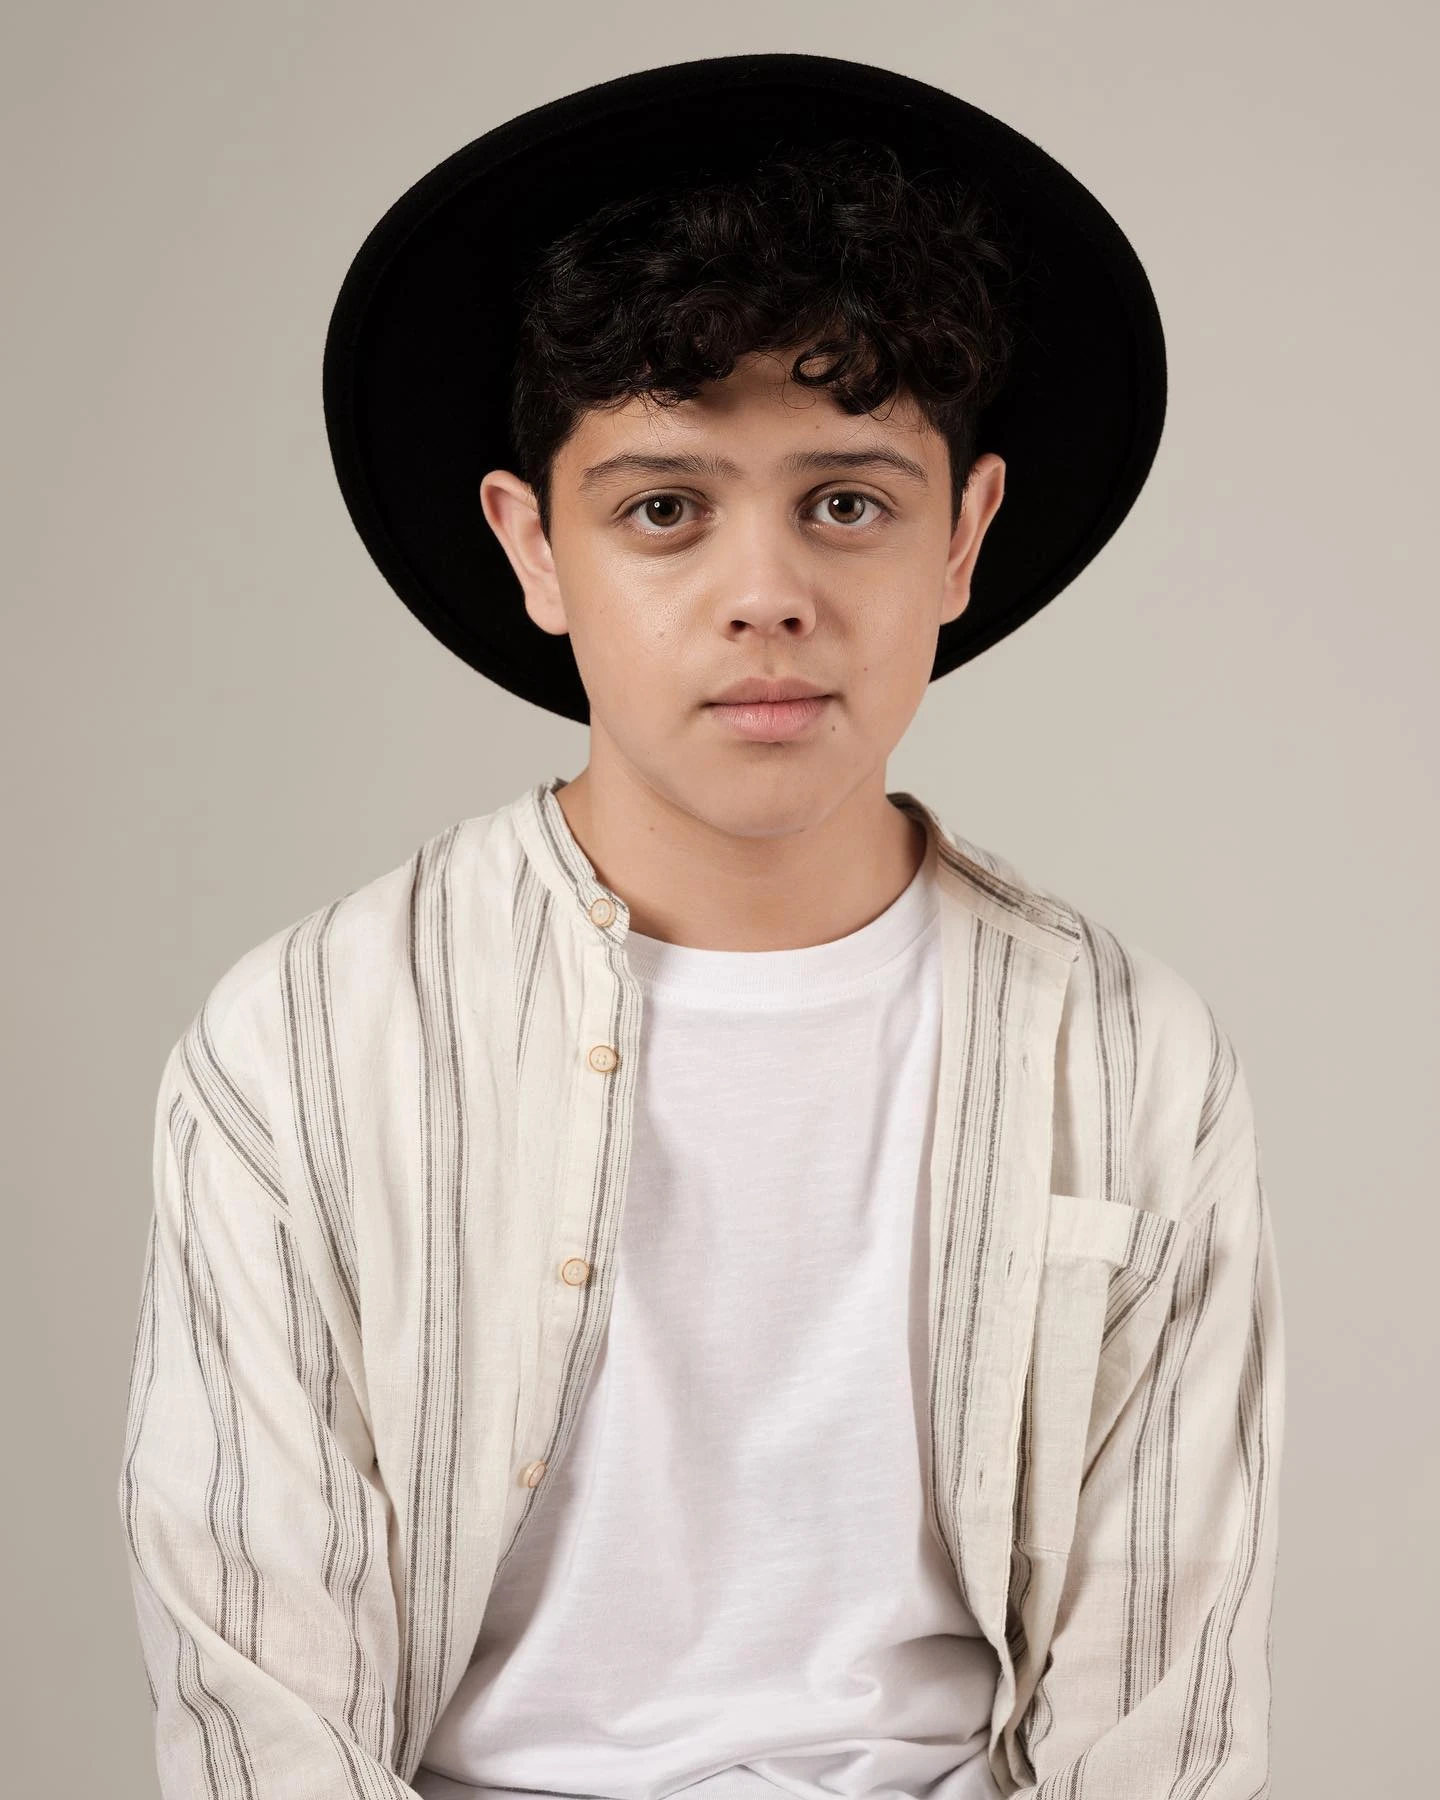 Who Is Isaac Ordonez? Age, Bio, Career And More Of The Wednesday Actor